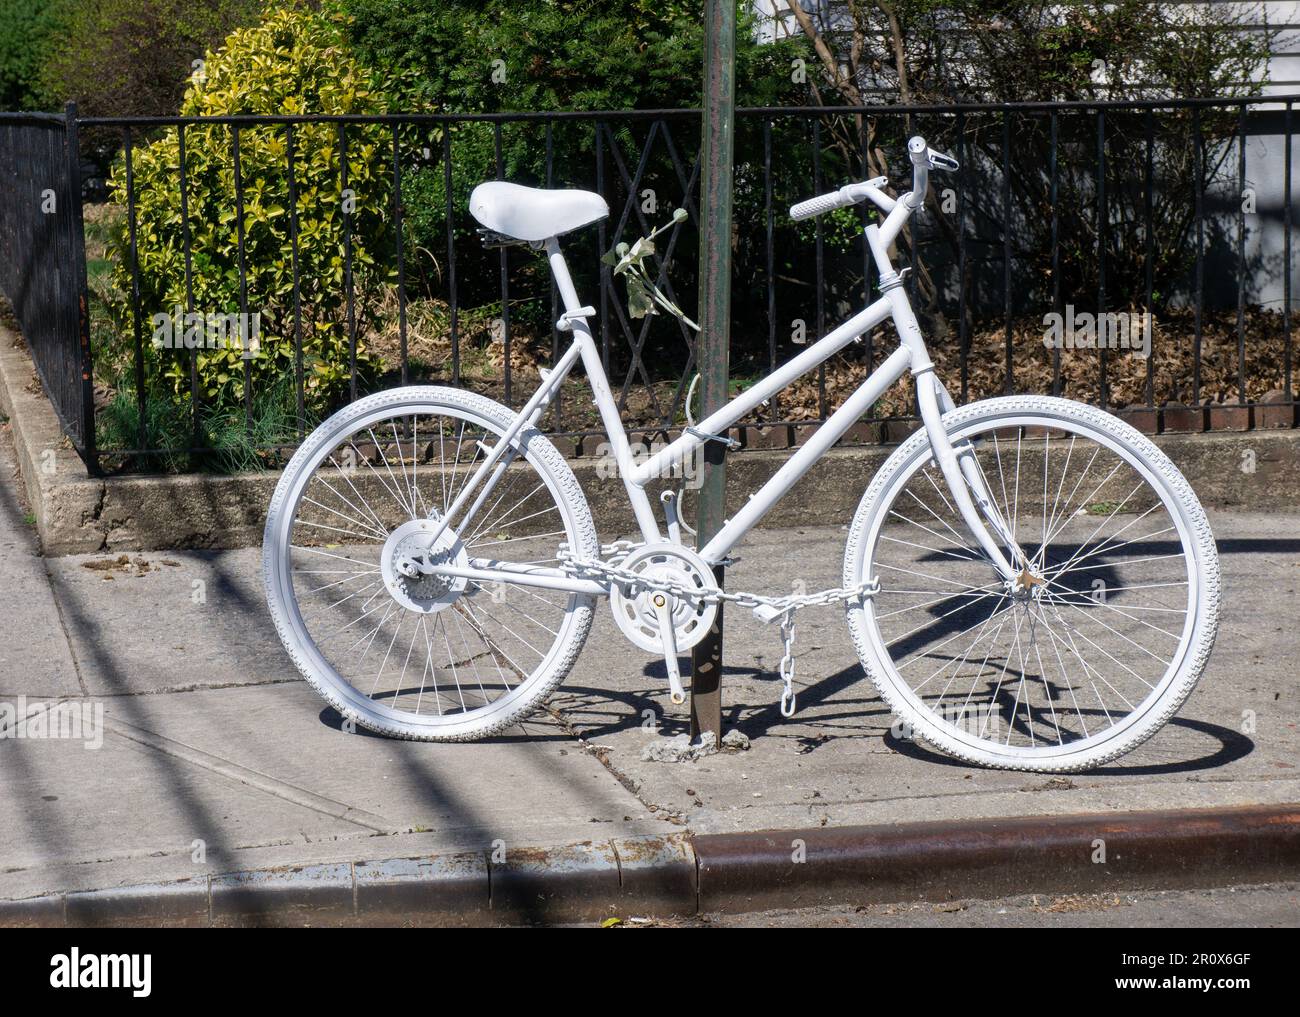 A completely white bicycle, a Ghost Bike  installed to commemorate a fatal bike crash. This on is 94th St & 40th Drive in Elmhurst, Queens, New York. Stock Photo